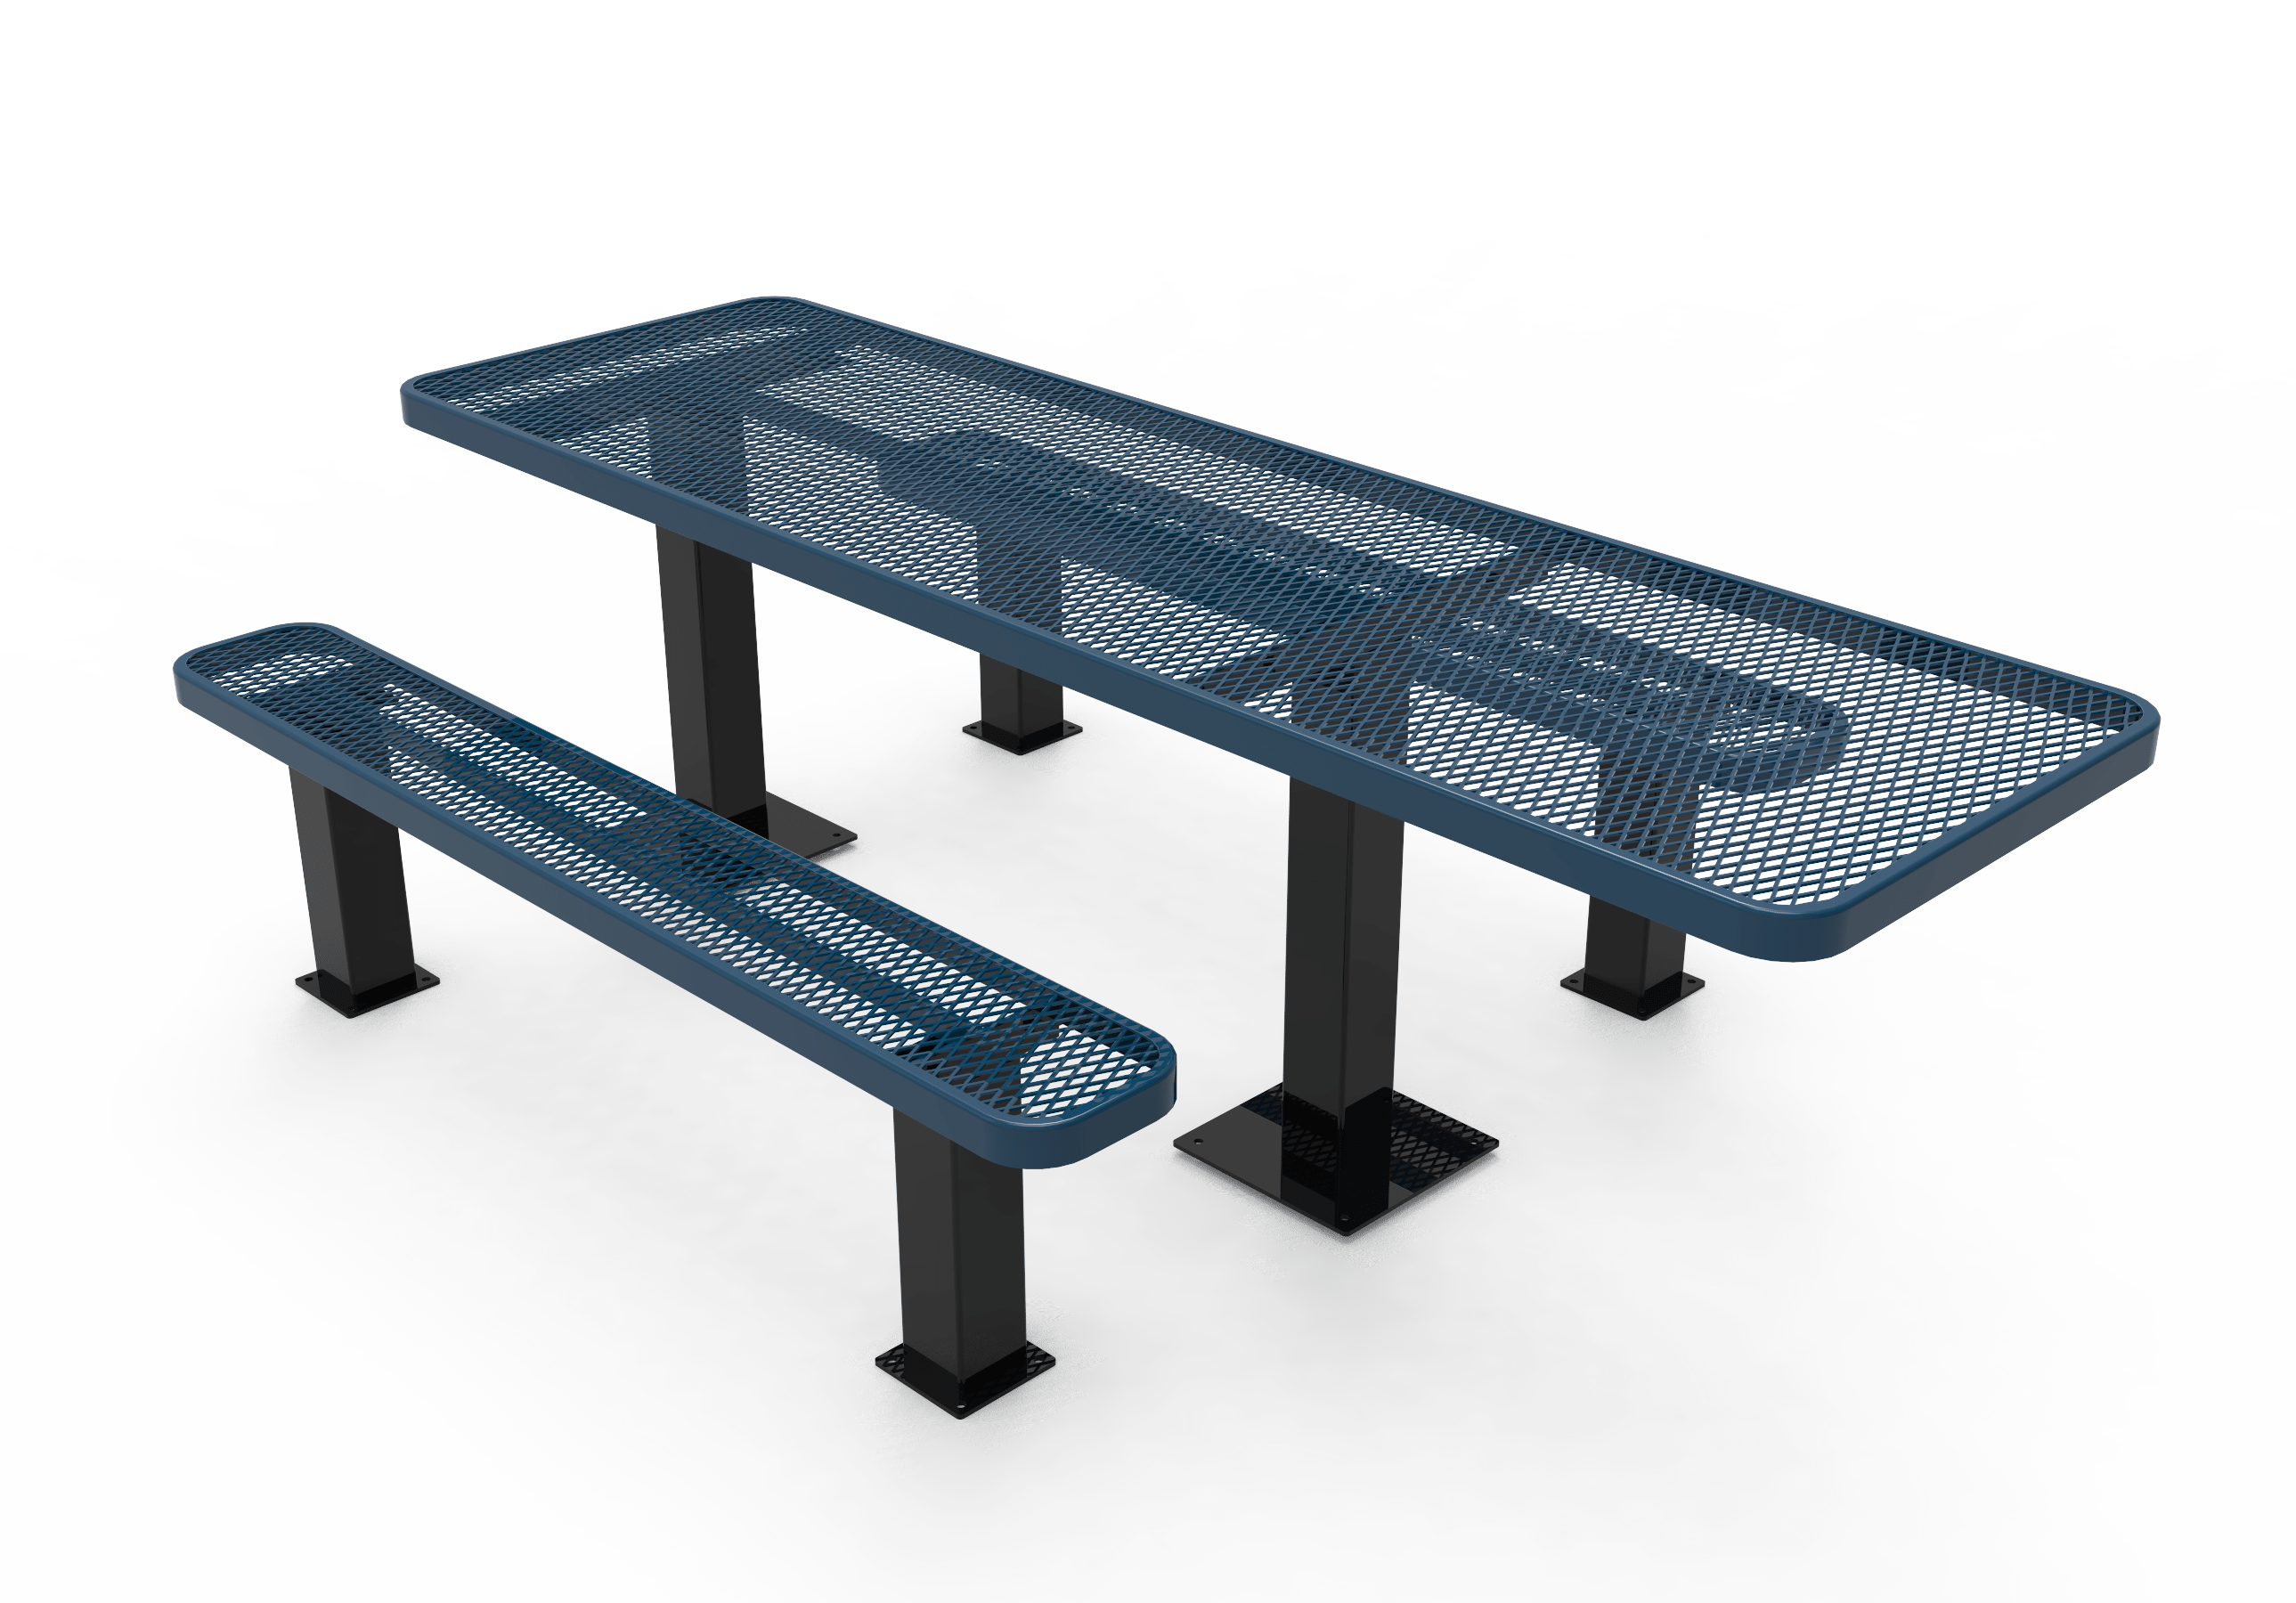 8′ Independent Surface Table Accessible -Mesh
TRT08-C-11-001
Industry Standard Finish
$1329.00
TRT08-A-11-001
Advantage Premium Finish
$1669.00
